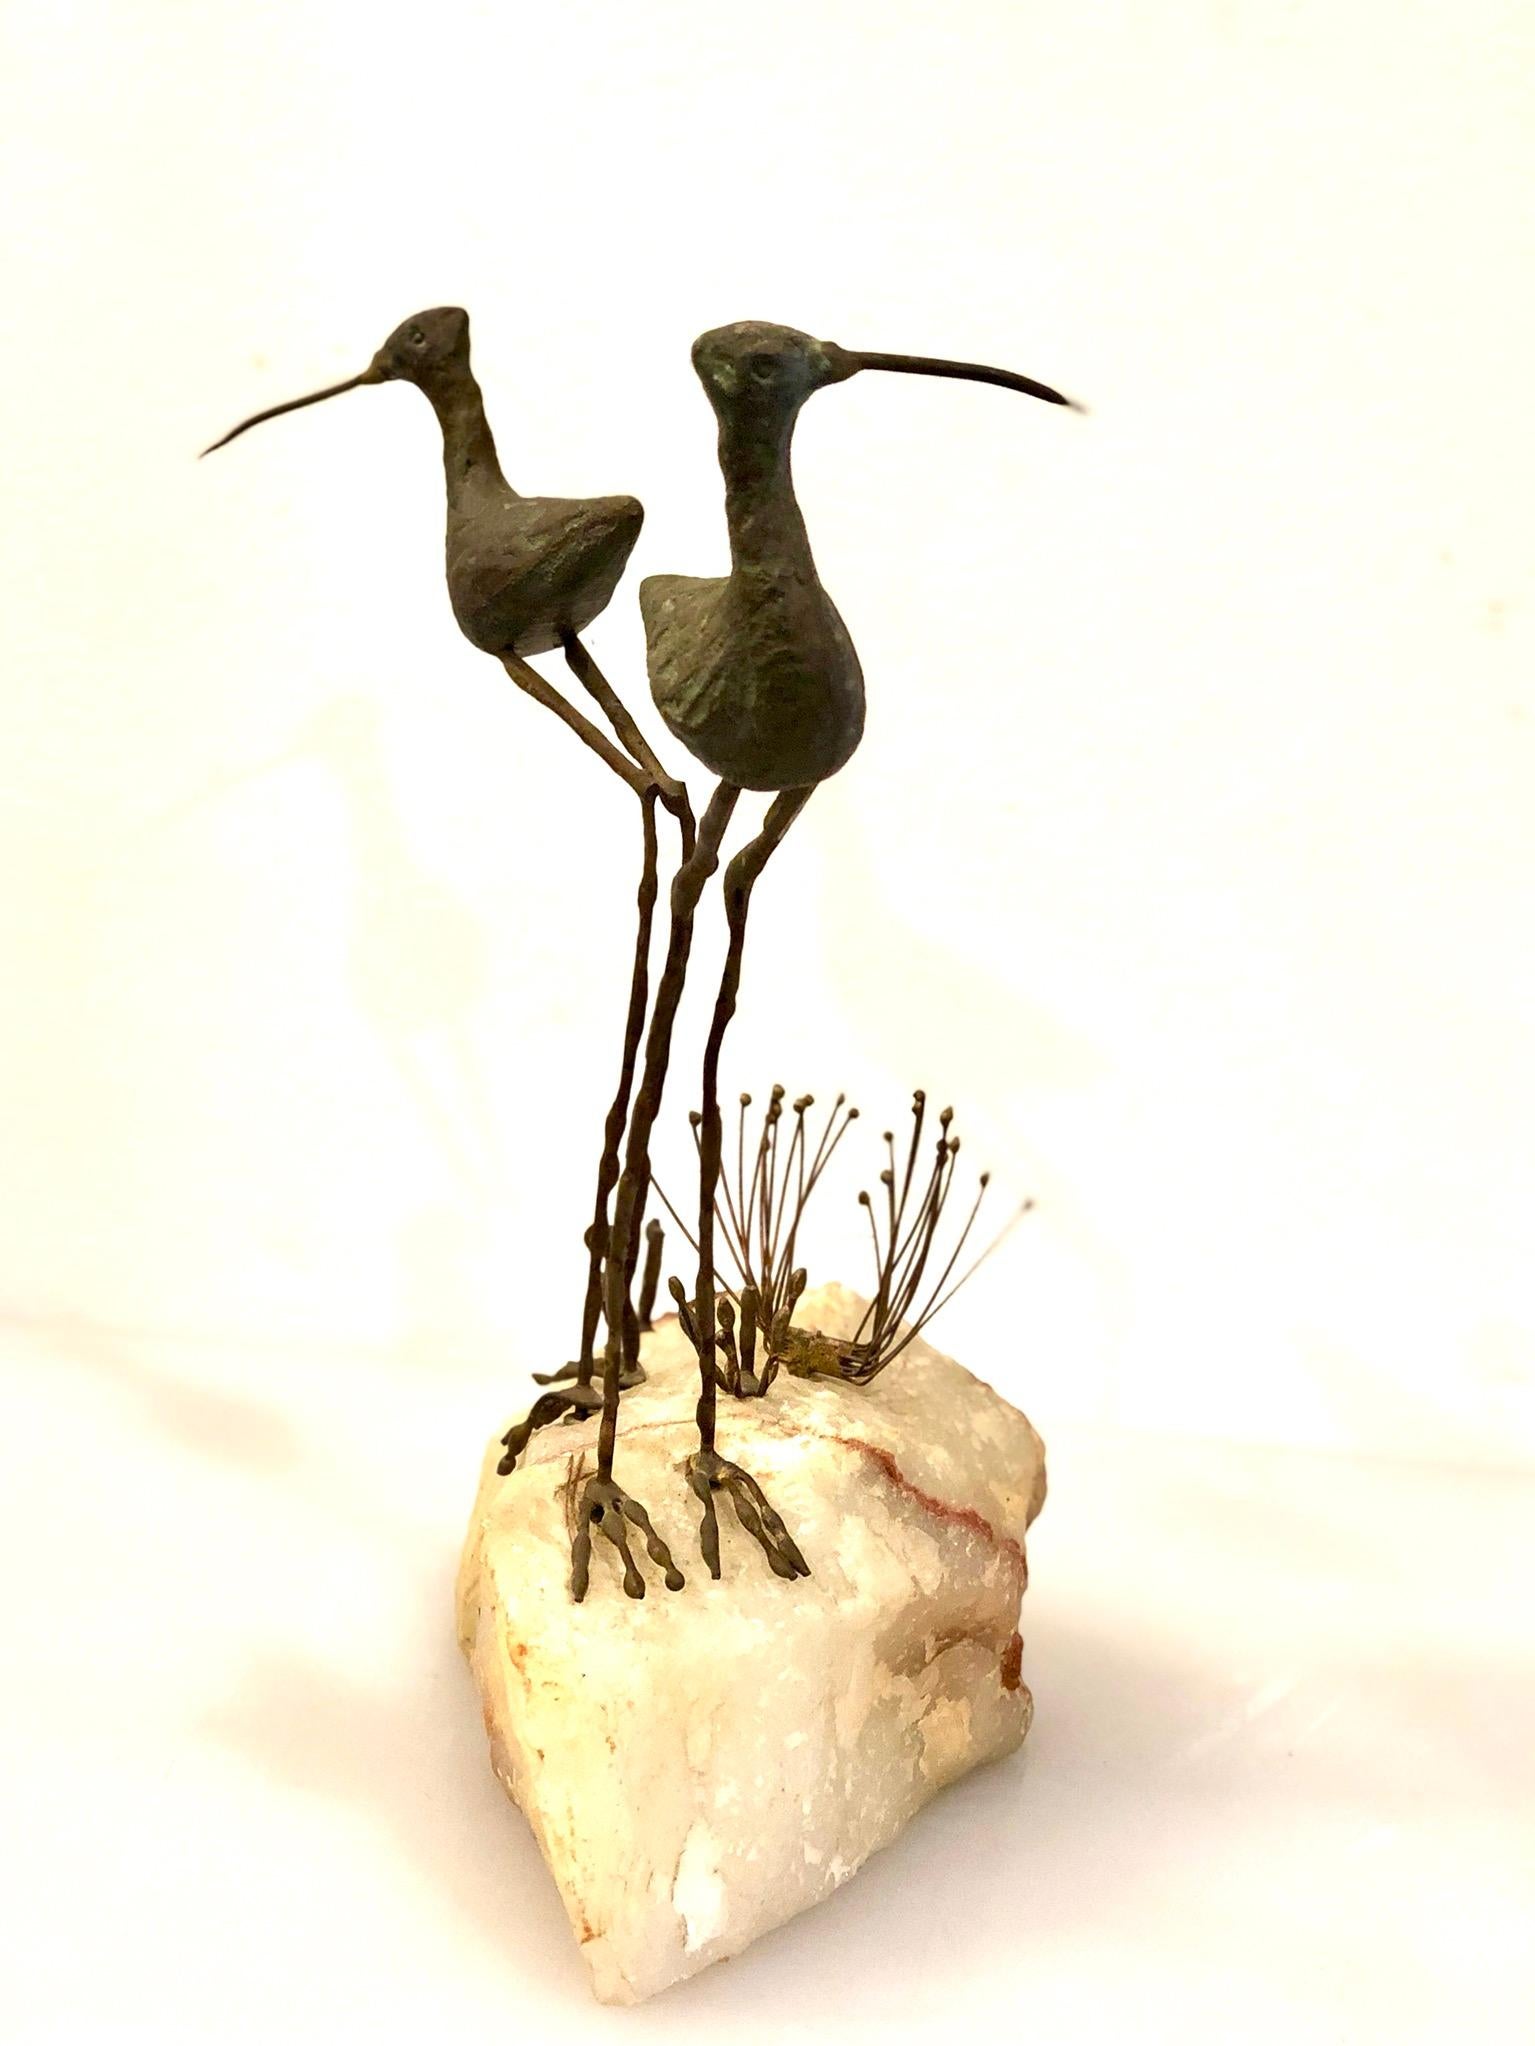 Whimsical pair of bronze birds sculpture sitting on a solid block of white quartz by Curtis Jere, circa 1968. The piece is signed 